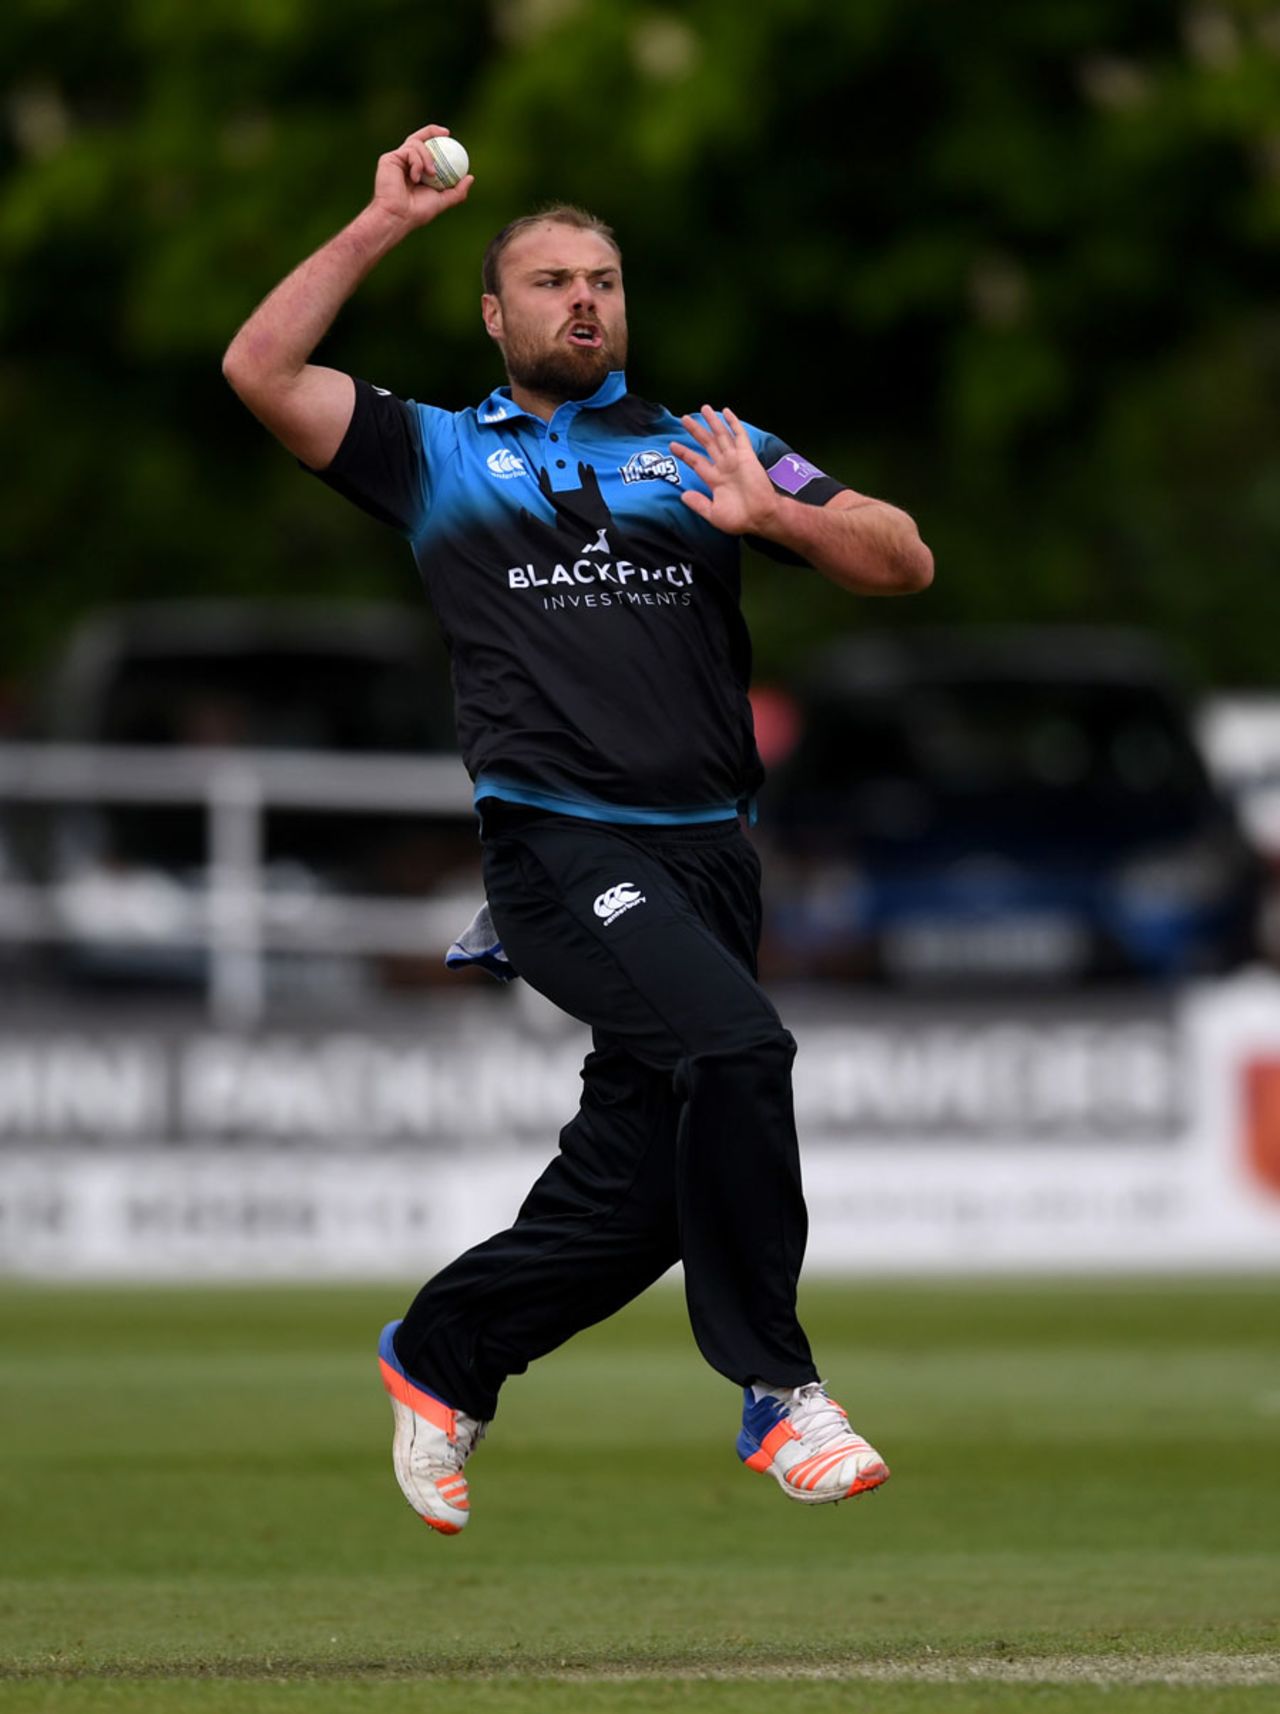 Joe Leach led the way with the ball, Worcestershire v Nottinghamshire, Royal London Cup, North Group, New Road, April 27, 2017